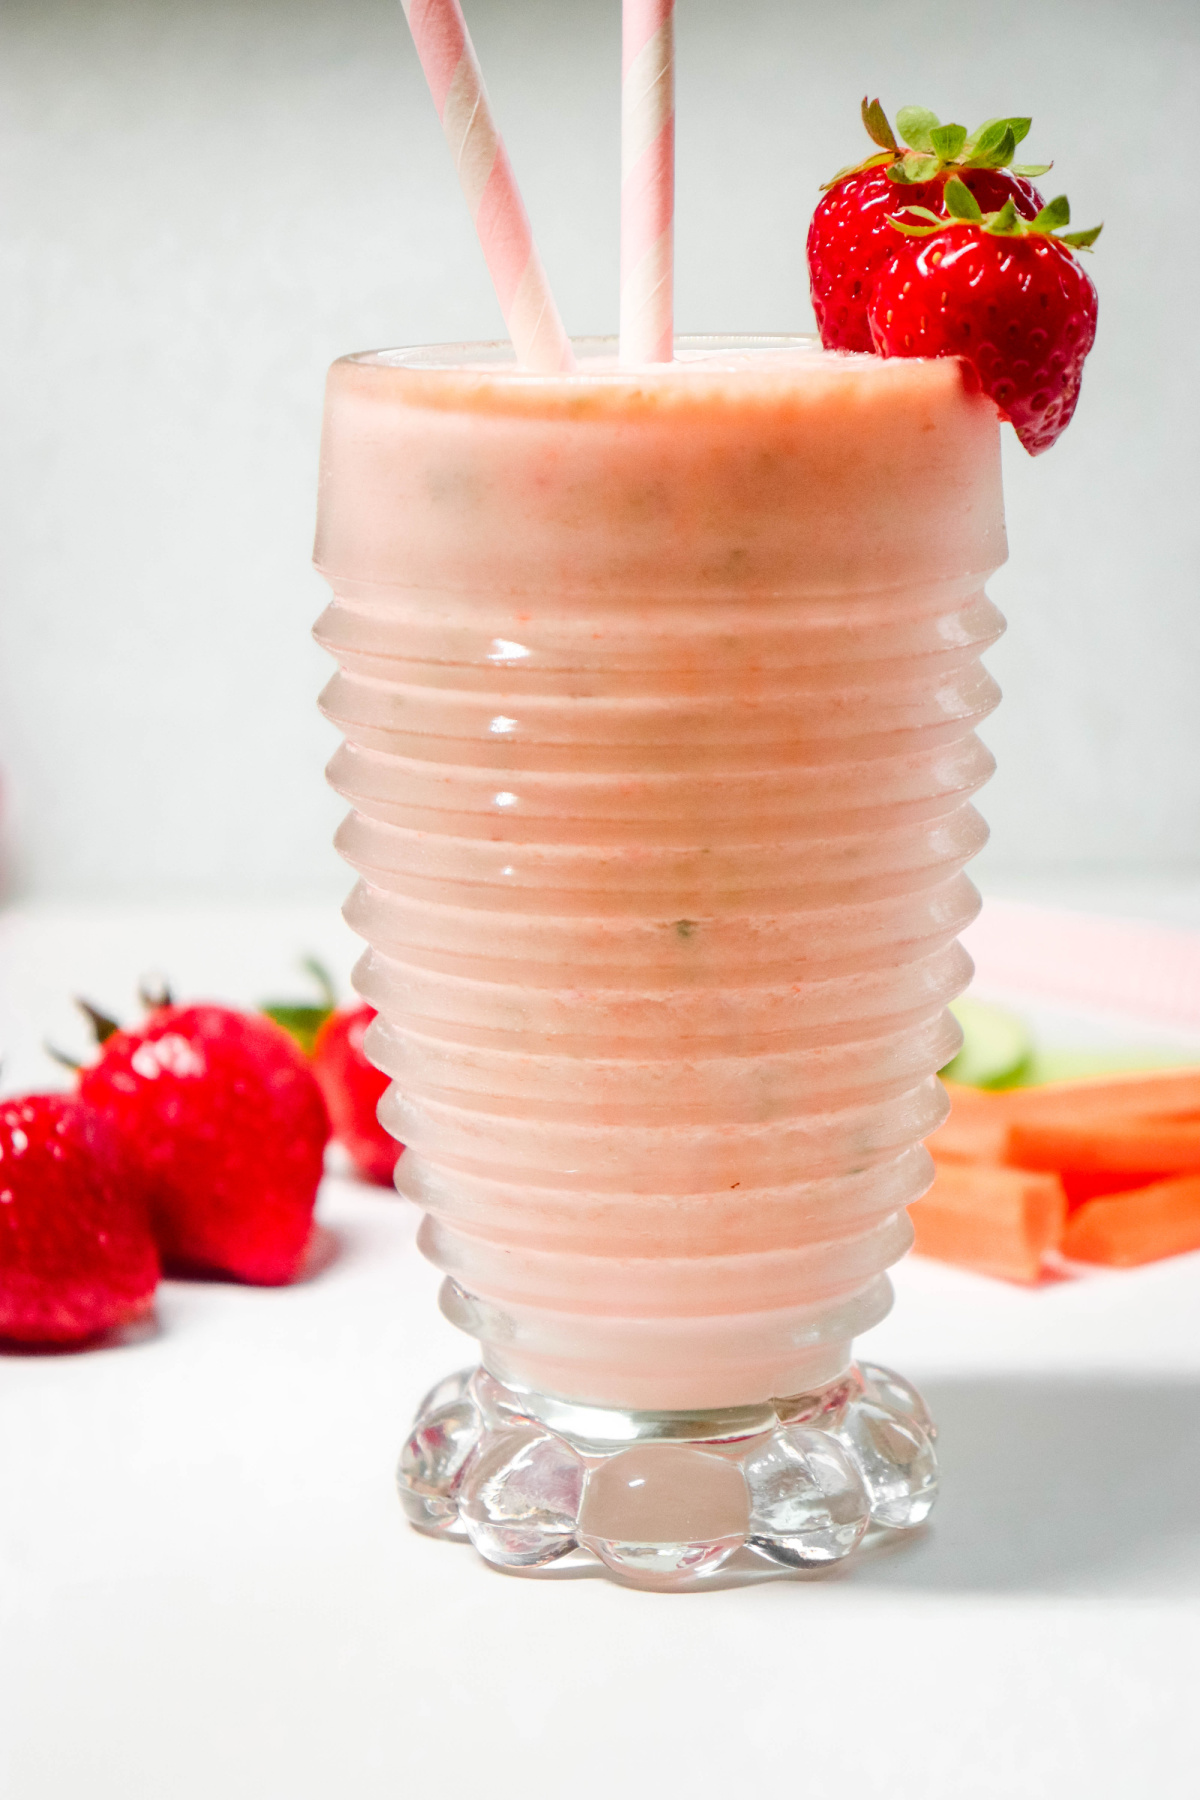 How to make a Carrot Cucumber Strawberry Smoothie